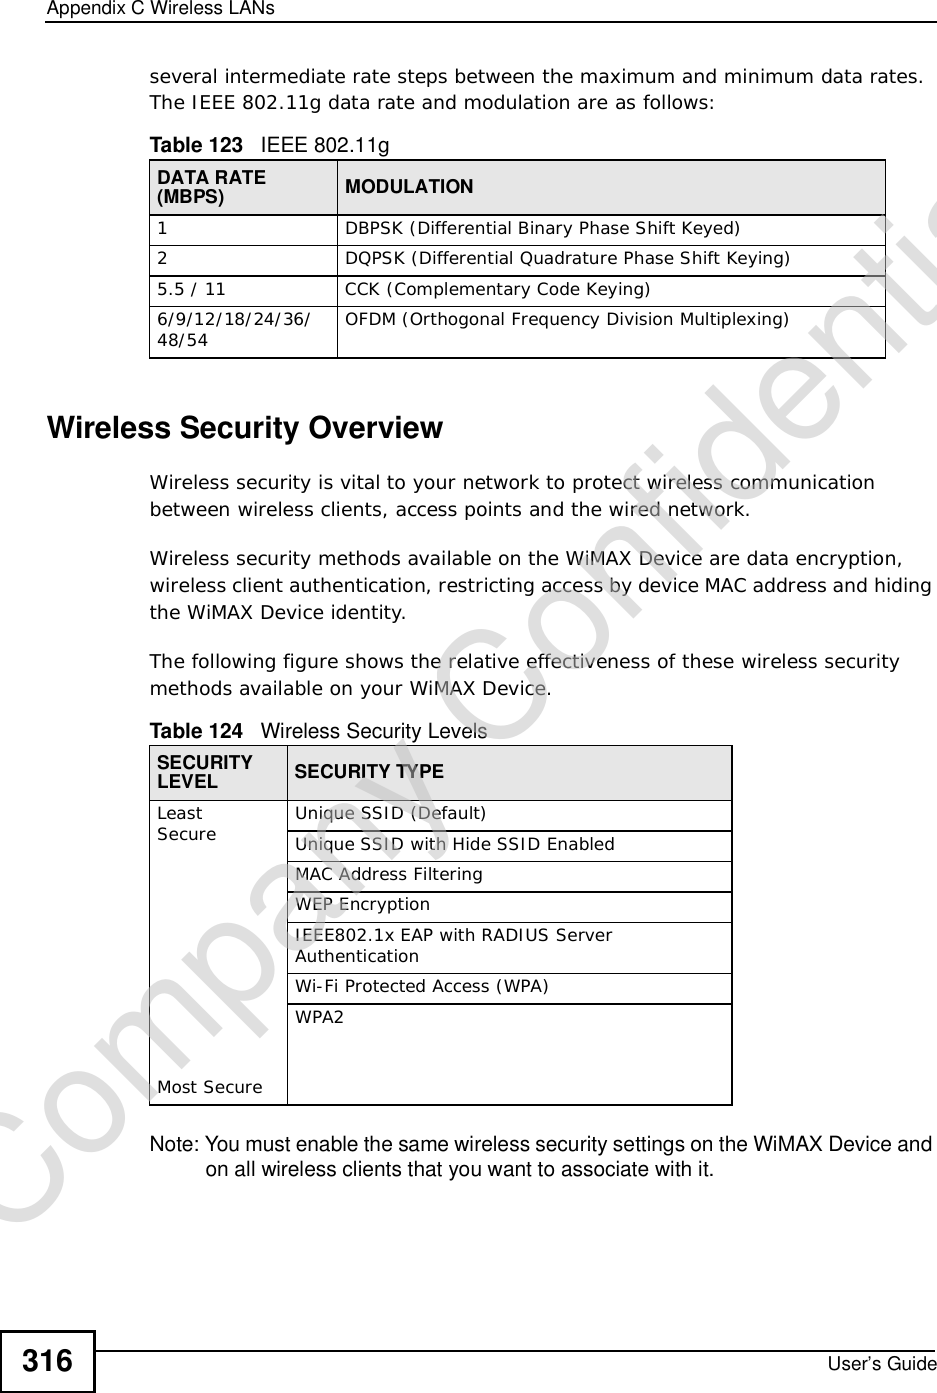 Appendix CWireless LANsUser’s Guide316several intermediate rate steps between the maximum and minimum data rates. The IEEE 802.11g data rate and modulation are as follows:Wireless Security OverviewWireless security is vital to your network to protect wireless communication between wireless clients, access points and the wired network.Wireless security methods available on the WiMAX Device are data encryption, wireless client authentication, restricting access by device MAC address and hiding the WiMAX Device identity.The following figure shows the relative effectiveness of these wireless security methods available on your WiMAX Device.Note: You must enable the same wireless security settings on the WiMAX Device and on all wireless clients that you want to associate with it. Table 123   IEEE 802.11gDATA RATE (MBPS) MODULATION1DBPSK (Differential Binary Phase Shift Keyed)2DQPSK (Differential Quadrature Phase Shift Keying)5.5 / 11CCK (Complementary Code Keying) 6/9/12/18/24/36/48/54 OFDM (Orthogonal Frequency Division Multiplexing) Table 124   Wireless Security LevelsSECURITYLEVEL SECURITY TYPELeast       SecureMost SecureUnique SSID (Default)Unique SSID with Hide SSID EnabledMAC Address FilteringWEP EncryptionIEEE802.1x EAP with RADIUS Server AuthenticationWi-Fi Protected Access (WPA)WPA2Company Confidential